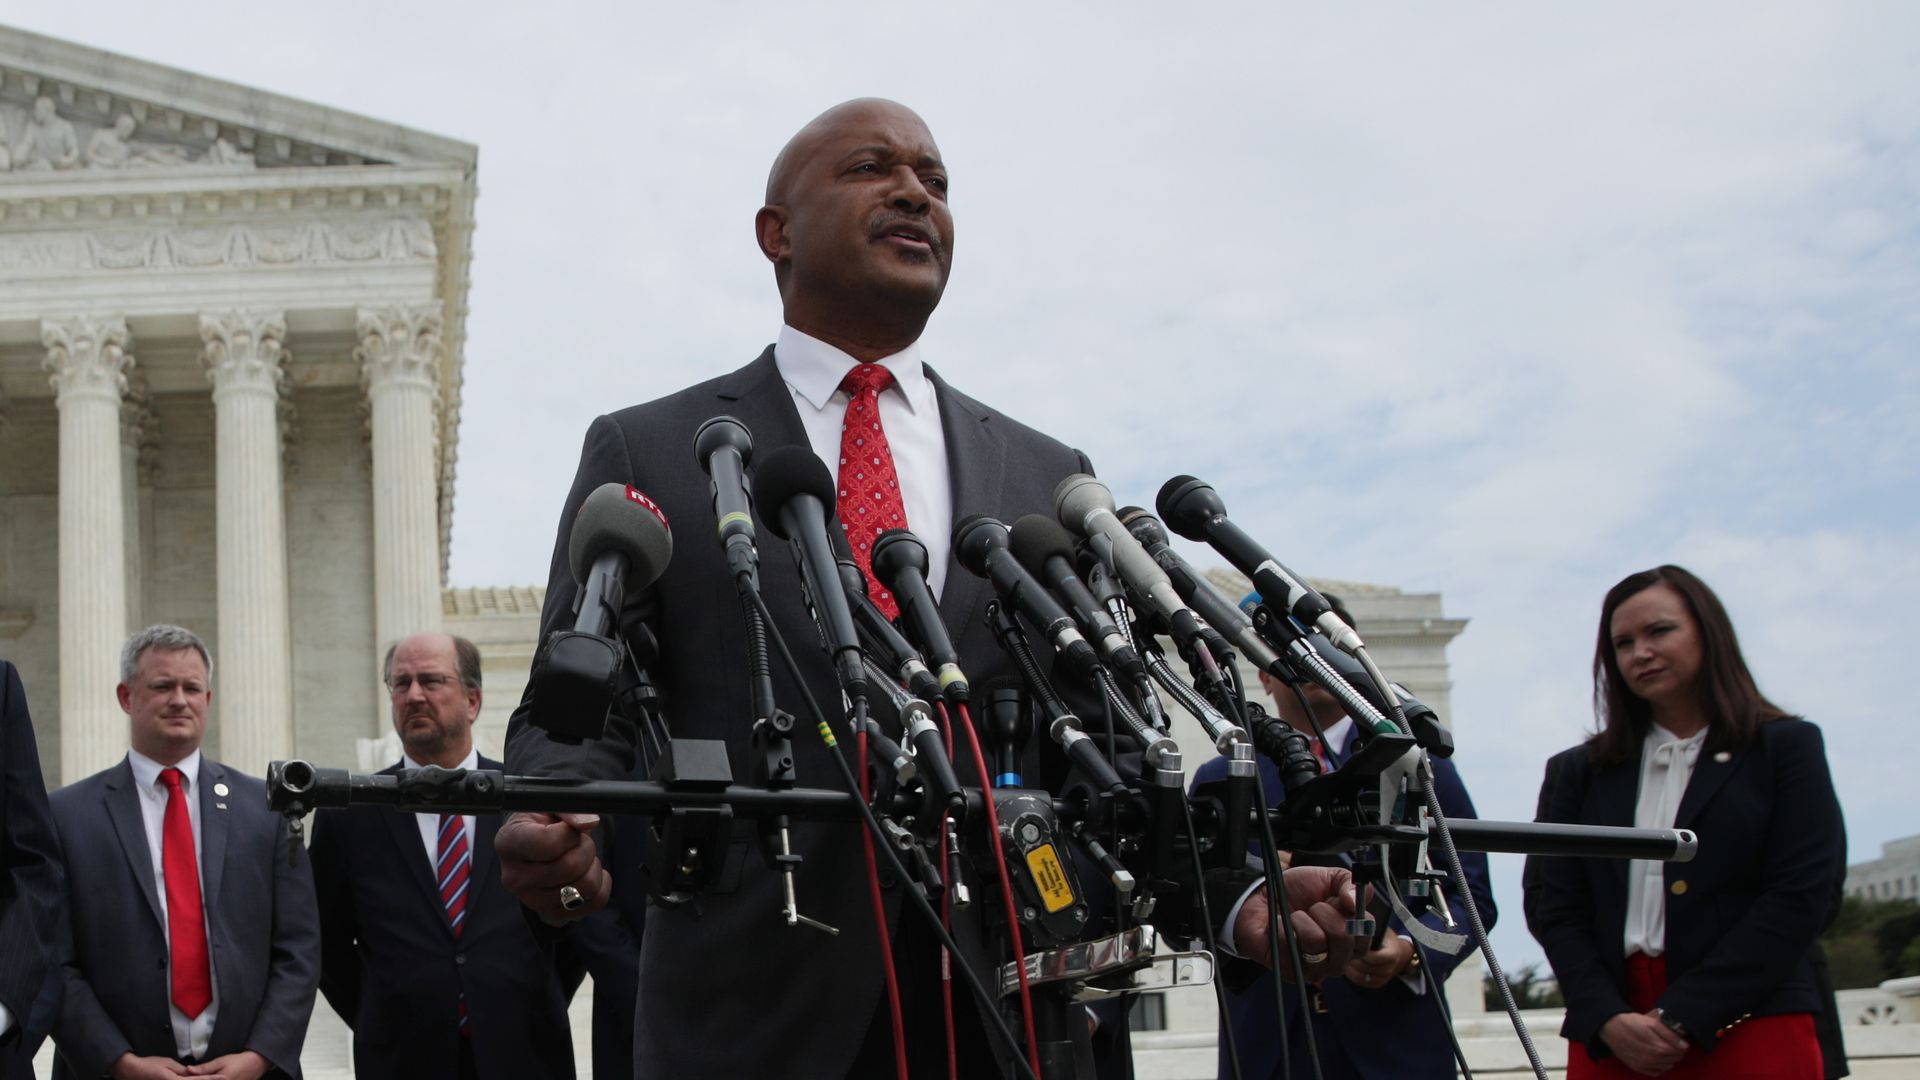 Indiana Attorney General Curtis Hill speaks as Washington, DC Attorney General Karl Racine at a news conference